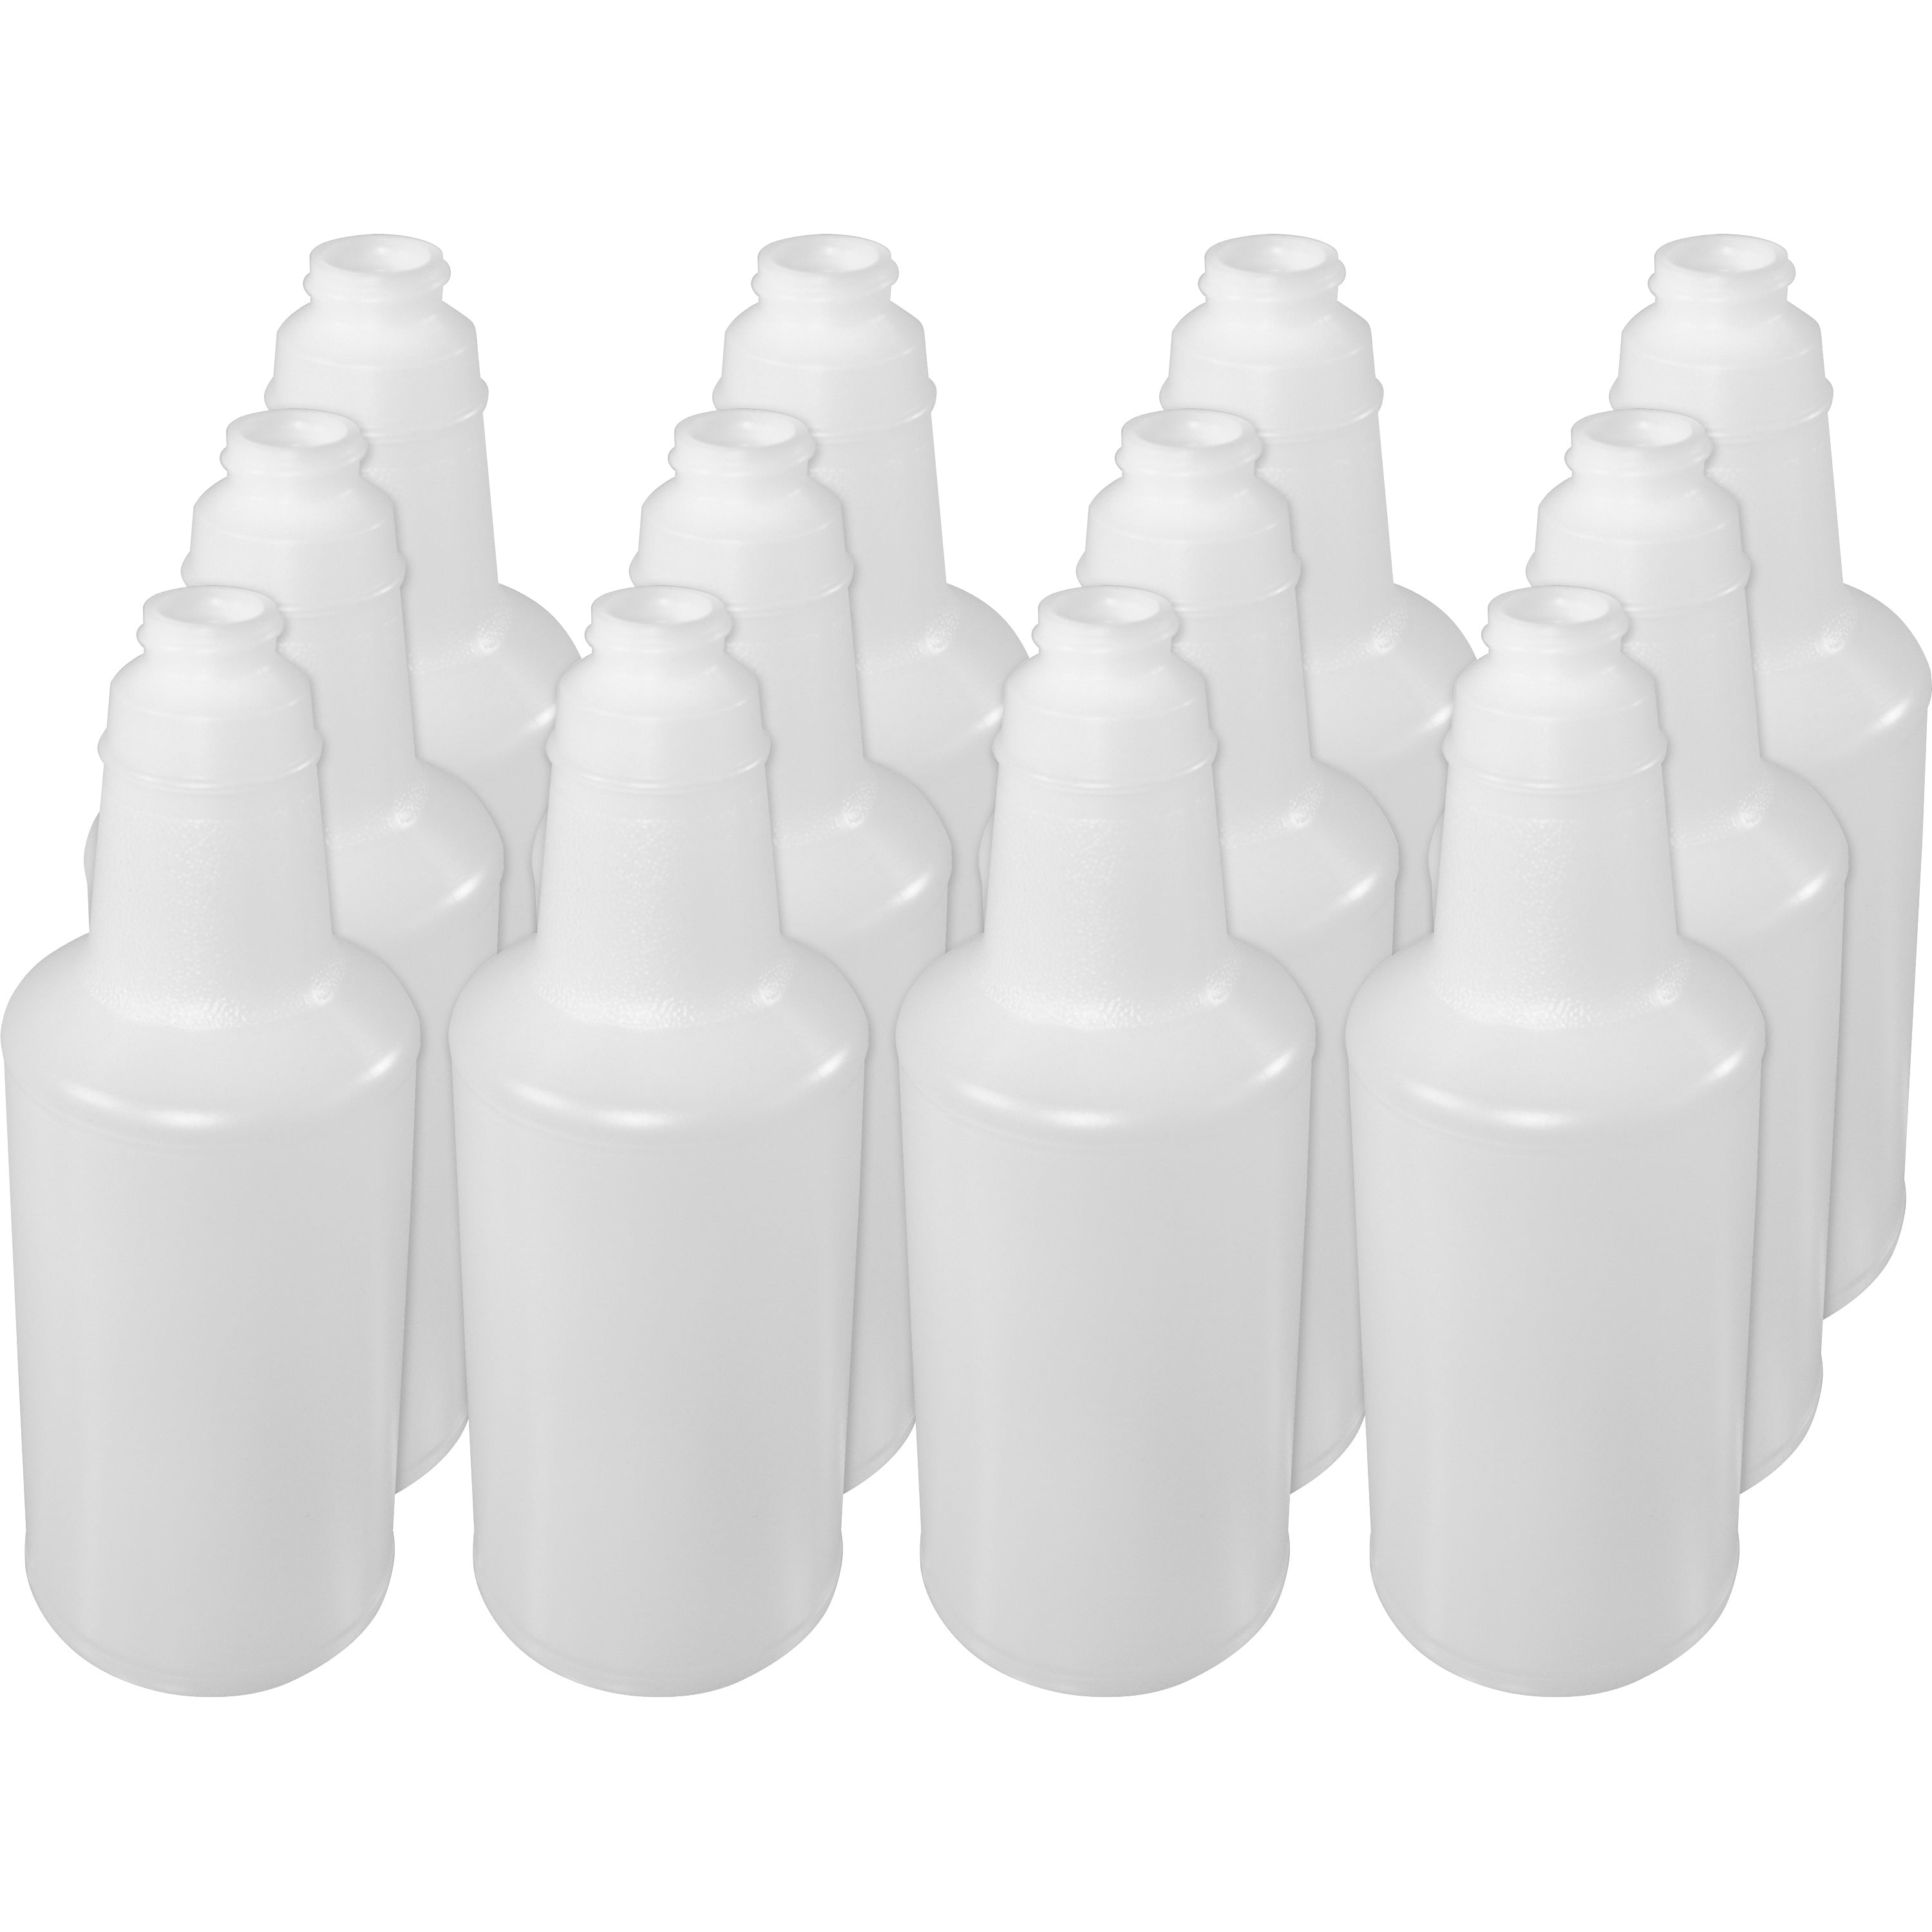 Genuine Joe Plastic Bottle with Graduations - Suitable For Cleaning - Lightweight, Durable, Graduated - 12 / Carton - Translucent - 